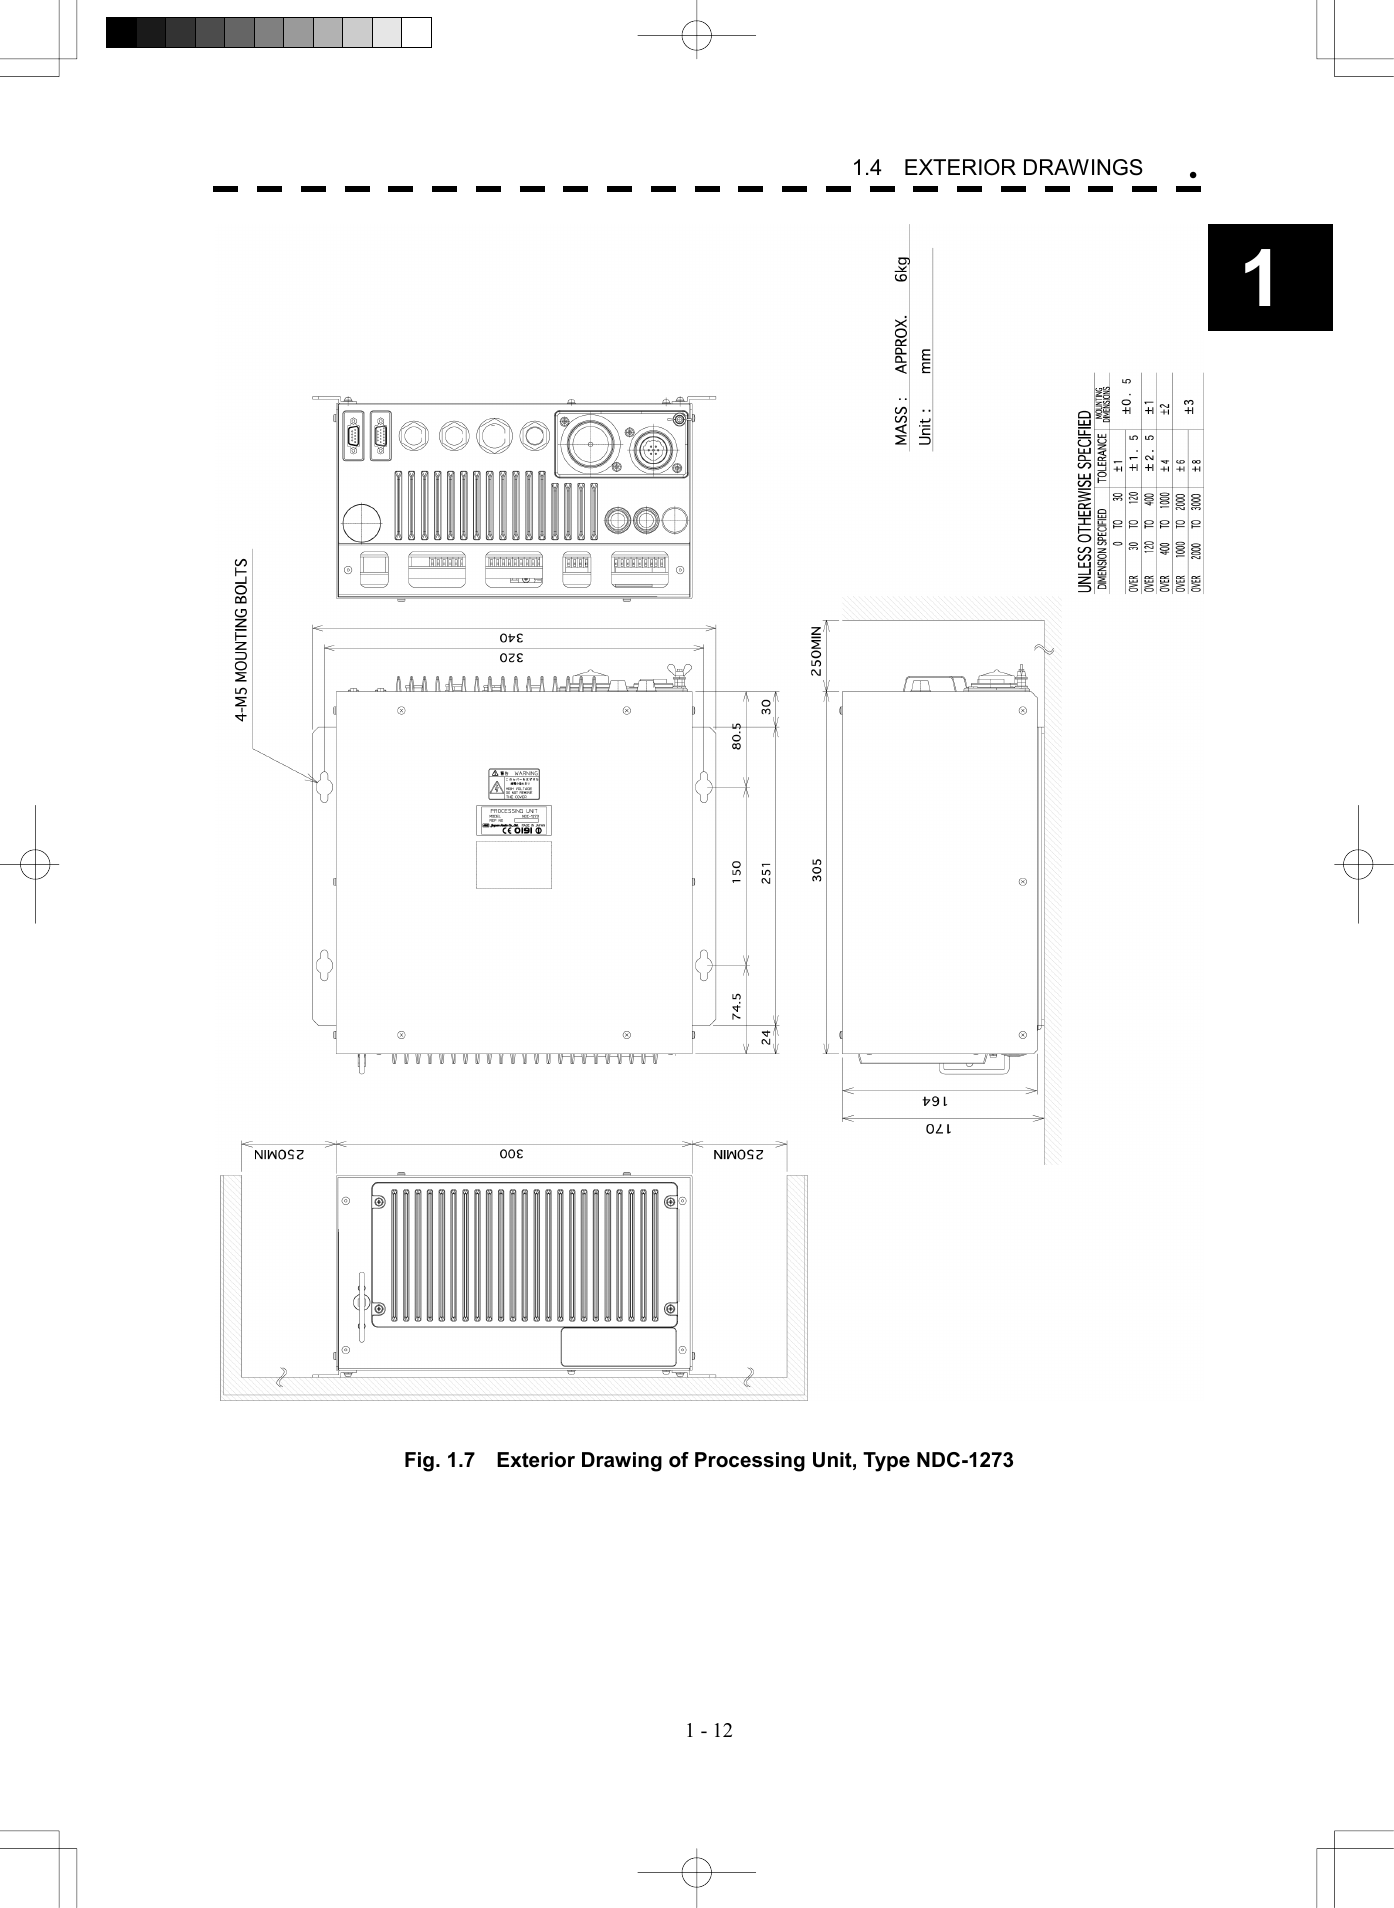  1 - 12 1.4  EXTERIOR DRAWINGS 1   Fig. 1.7  Exterior Drawing of Processing Unit, Type NDC-1273  